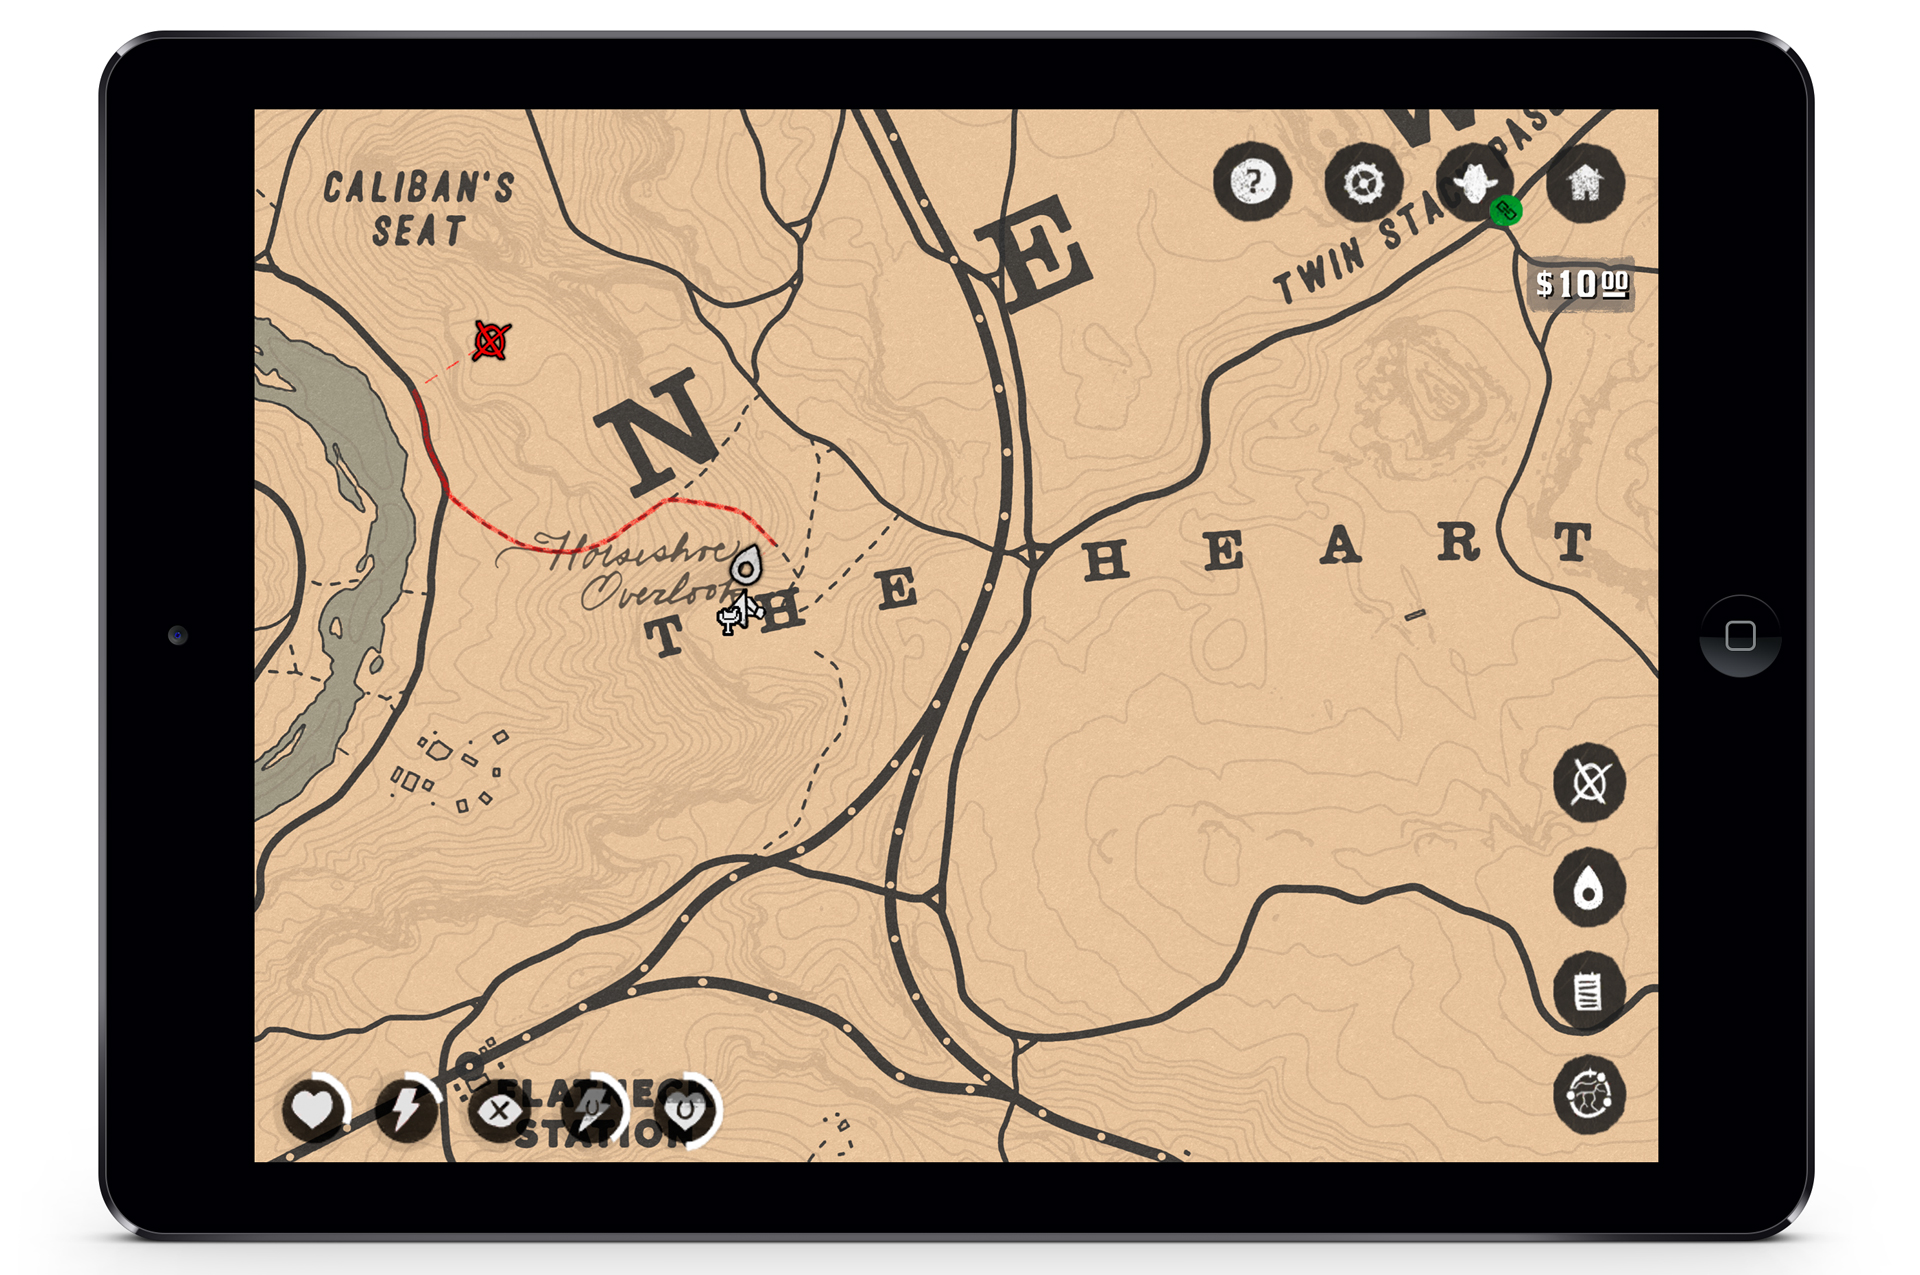 The Red Dead Redemption 2 Official Companion App - Rockstar Games